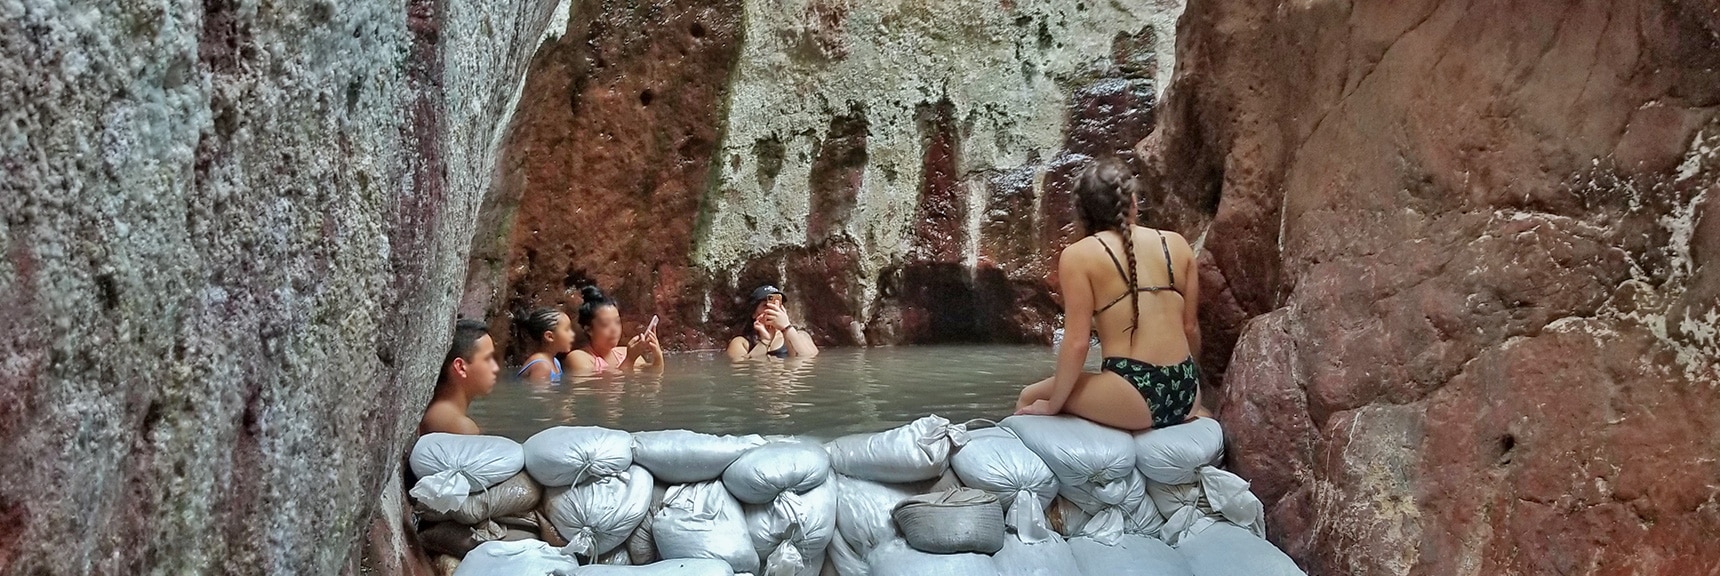 Hikers Enjoying a Day at the Hot Springs. | Arizona Hot Spring | Liberty Bell Arch | Lake Mead National Recreation Area, Arizona